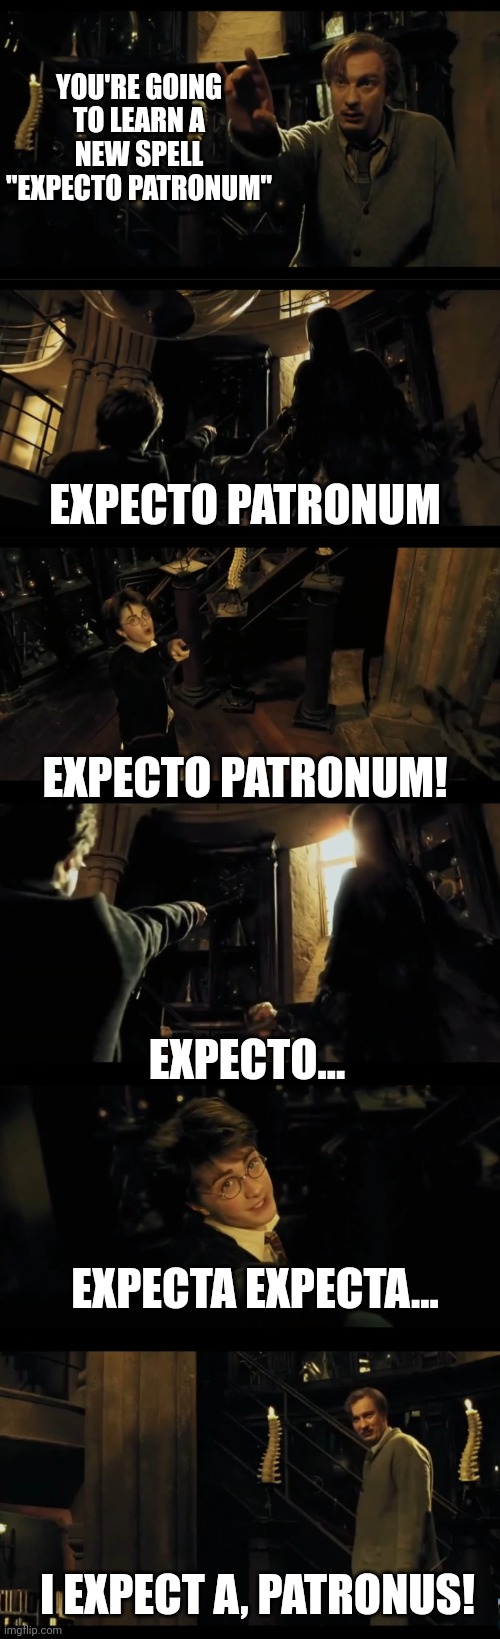 TRY HARDER HARRY | YOU'RE GOING TO LEARN A NEW SPELL "EXPECTO PATRONUM"; EXPECTO PATRONUM; EXPECTO PATRONUM! EXPECTO... EXPECTA EXPECTA... I EXPECT A, PATRONUS! | image tagged in harry potter,harry potter meme | made w/ Imgflip meme maker